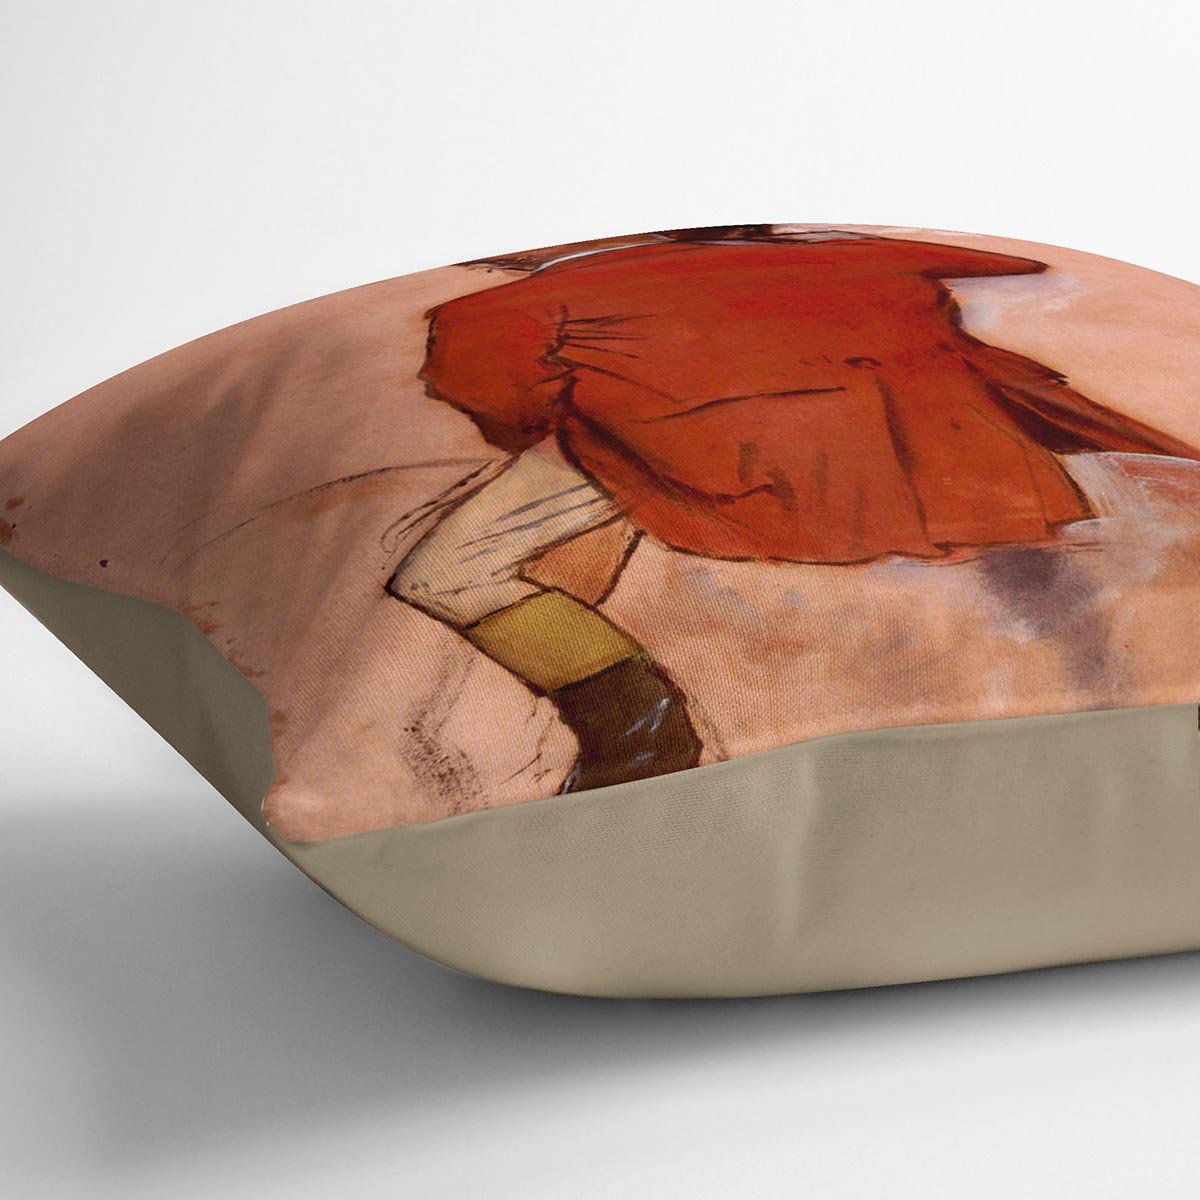 Rider with red jacket by Degas Cushion